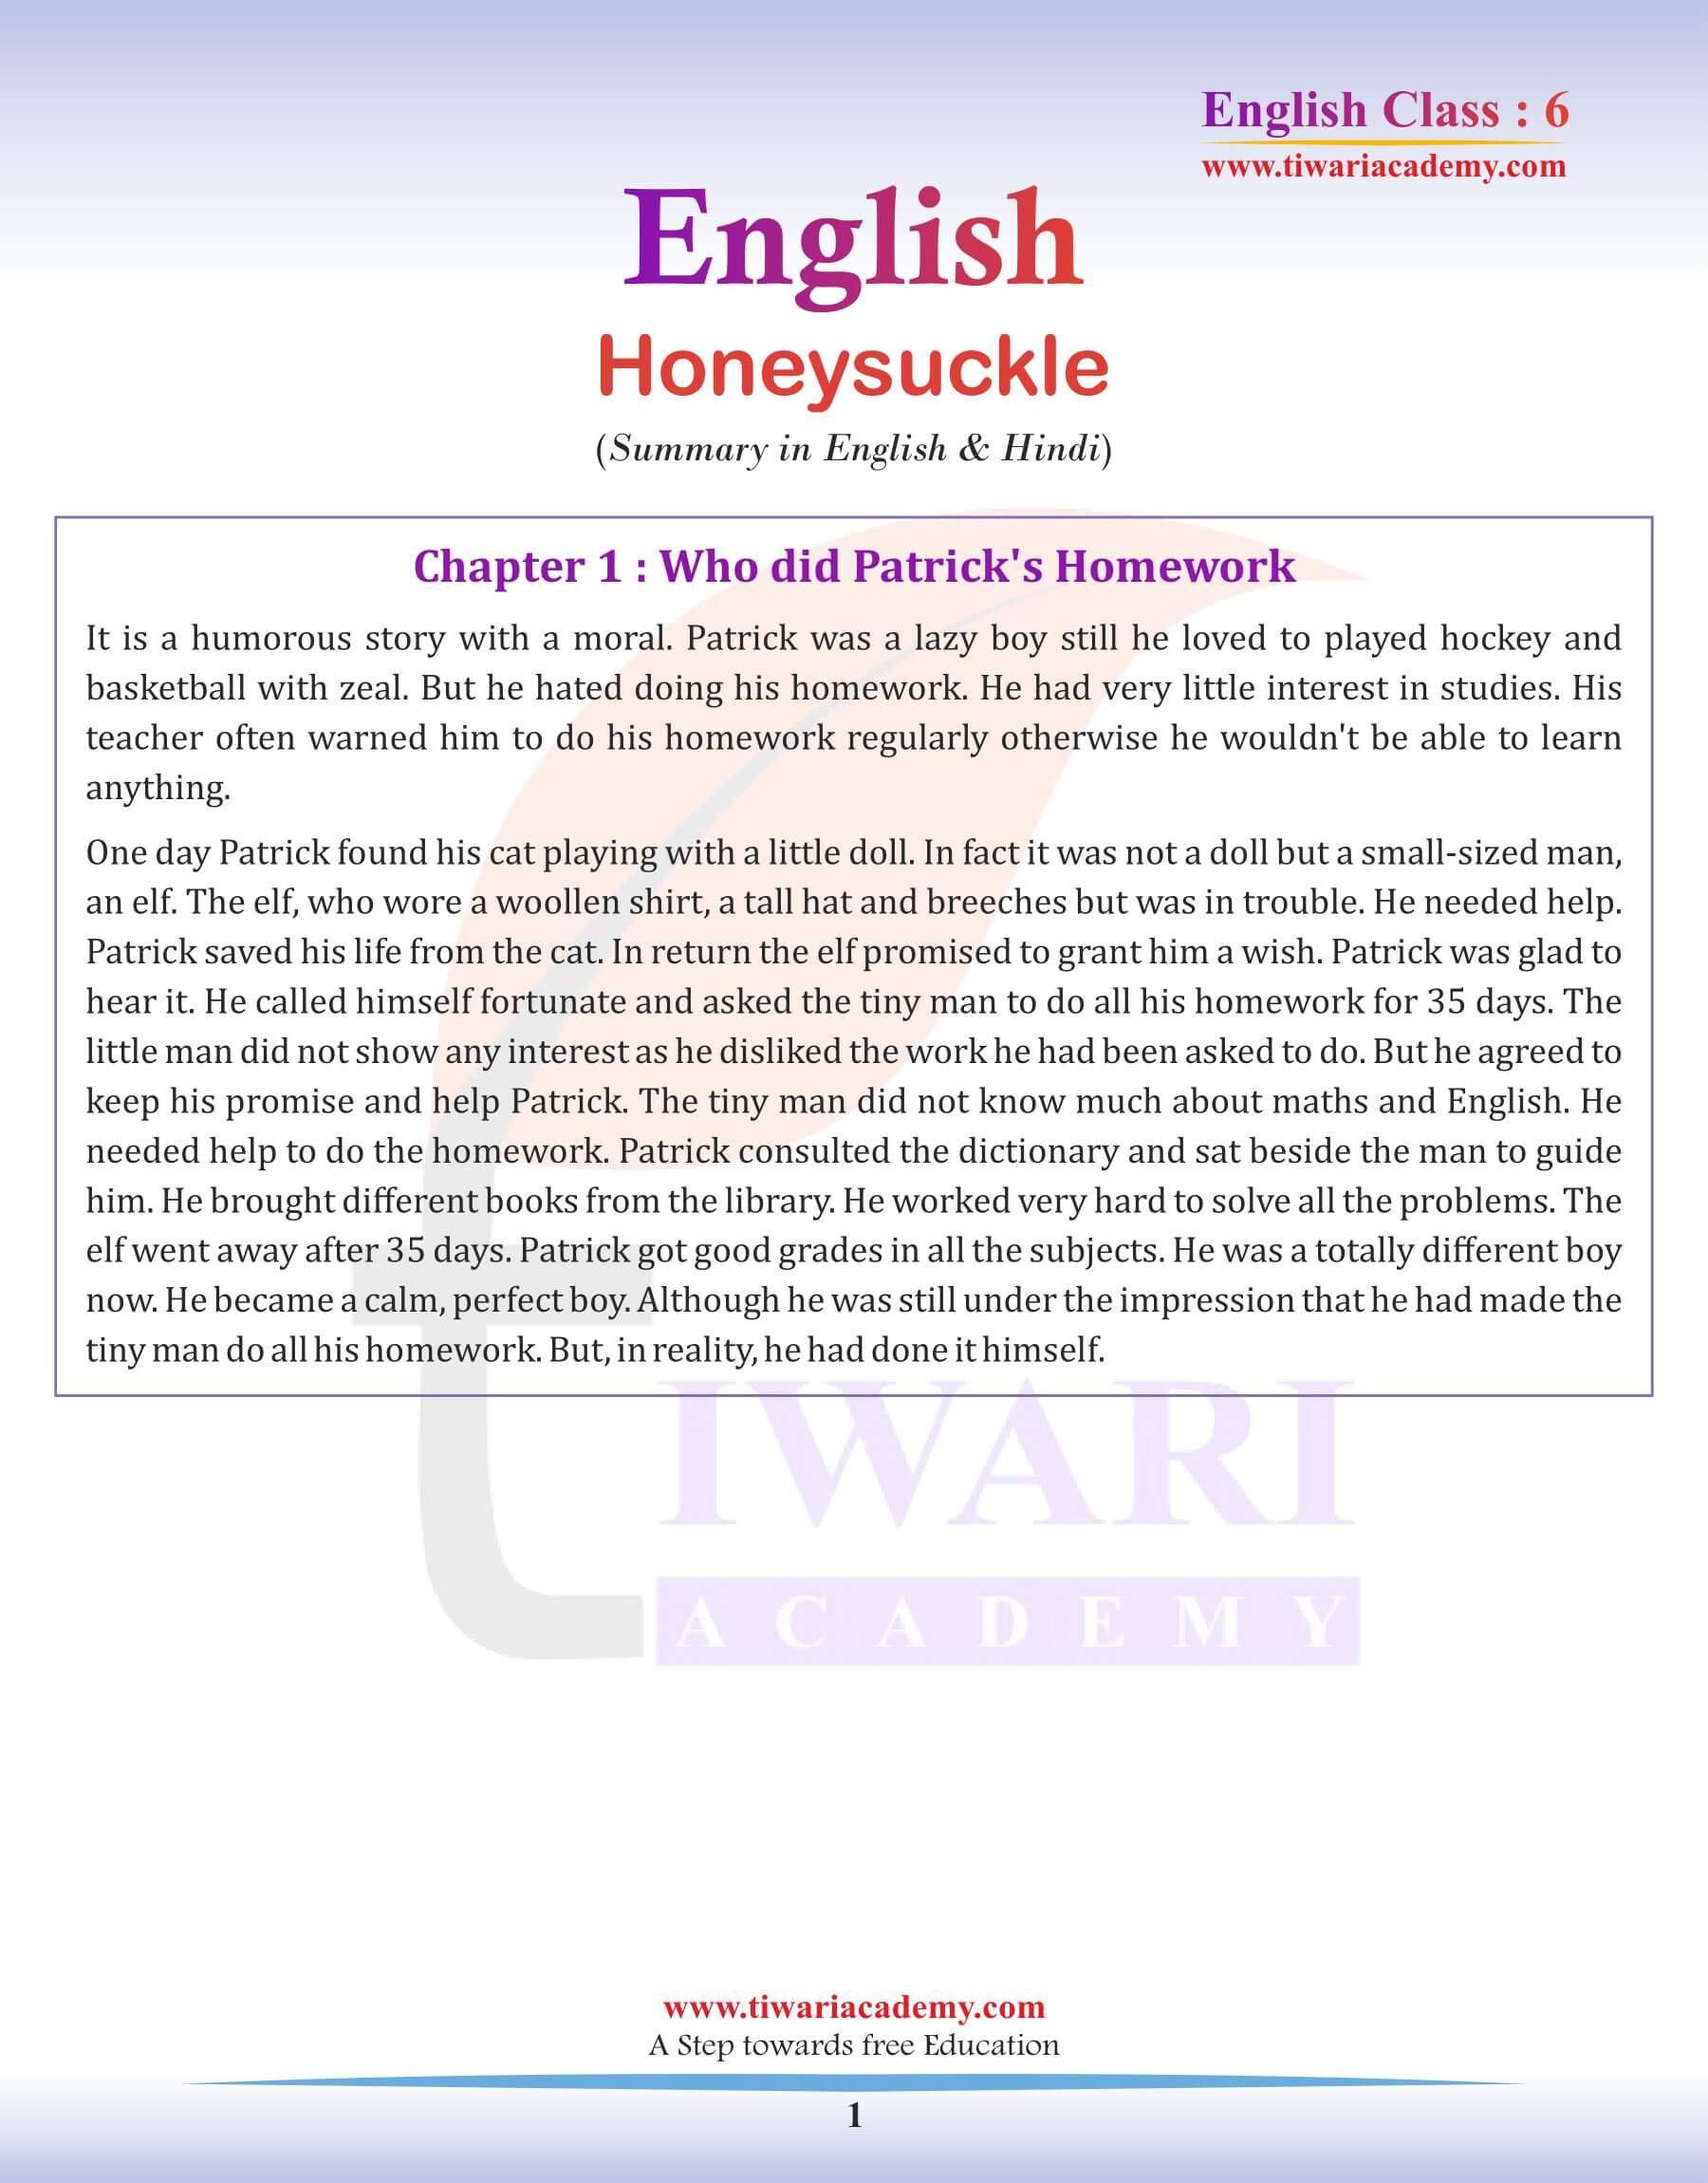 Class 6 English Chapter 1: Summary in English